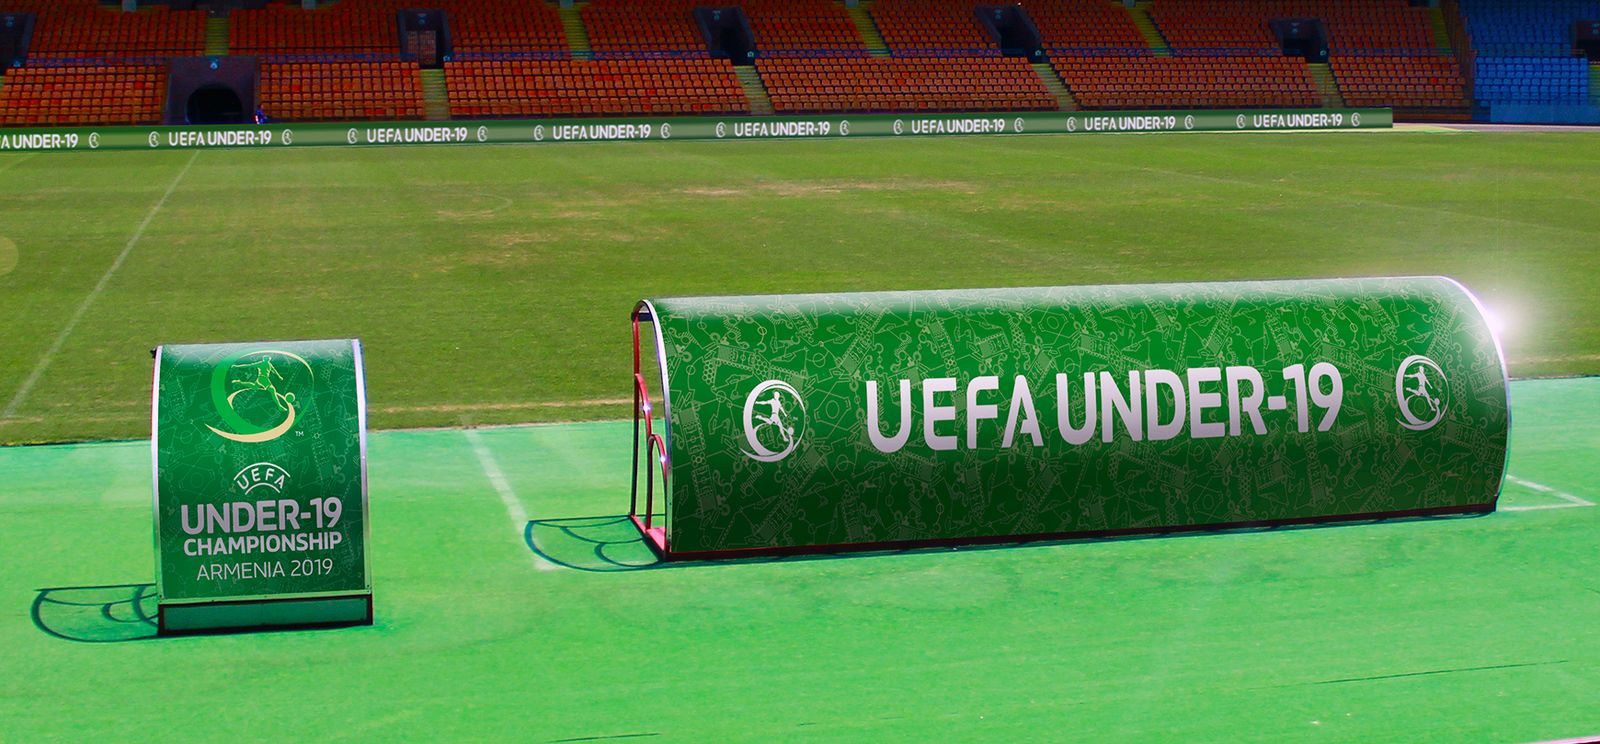 Uefa bench canopy banners